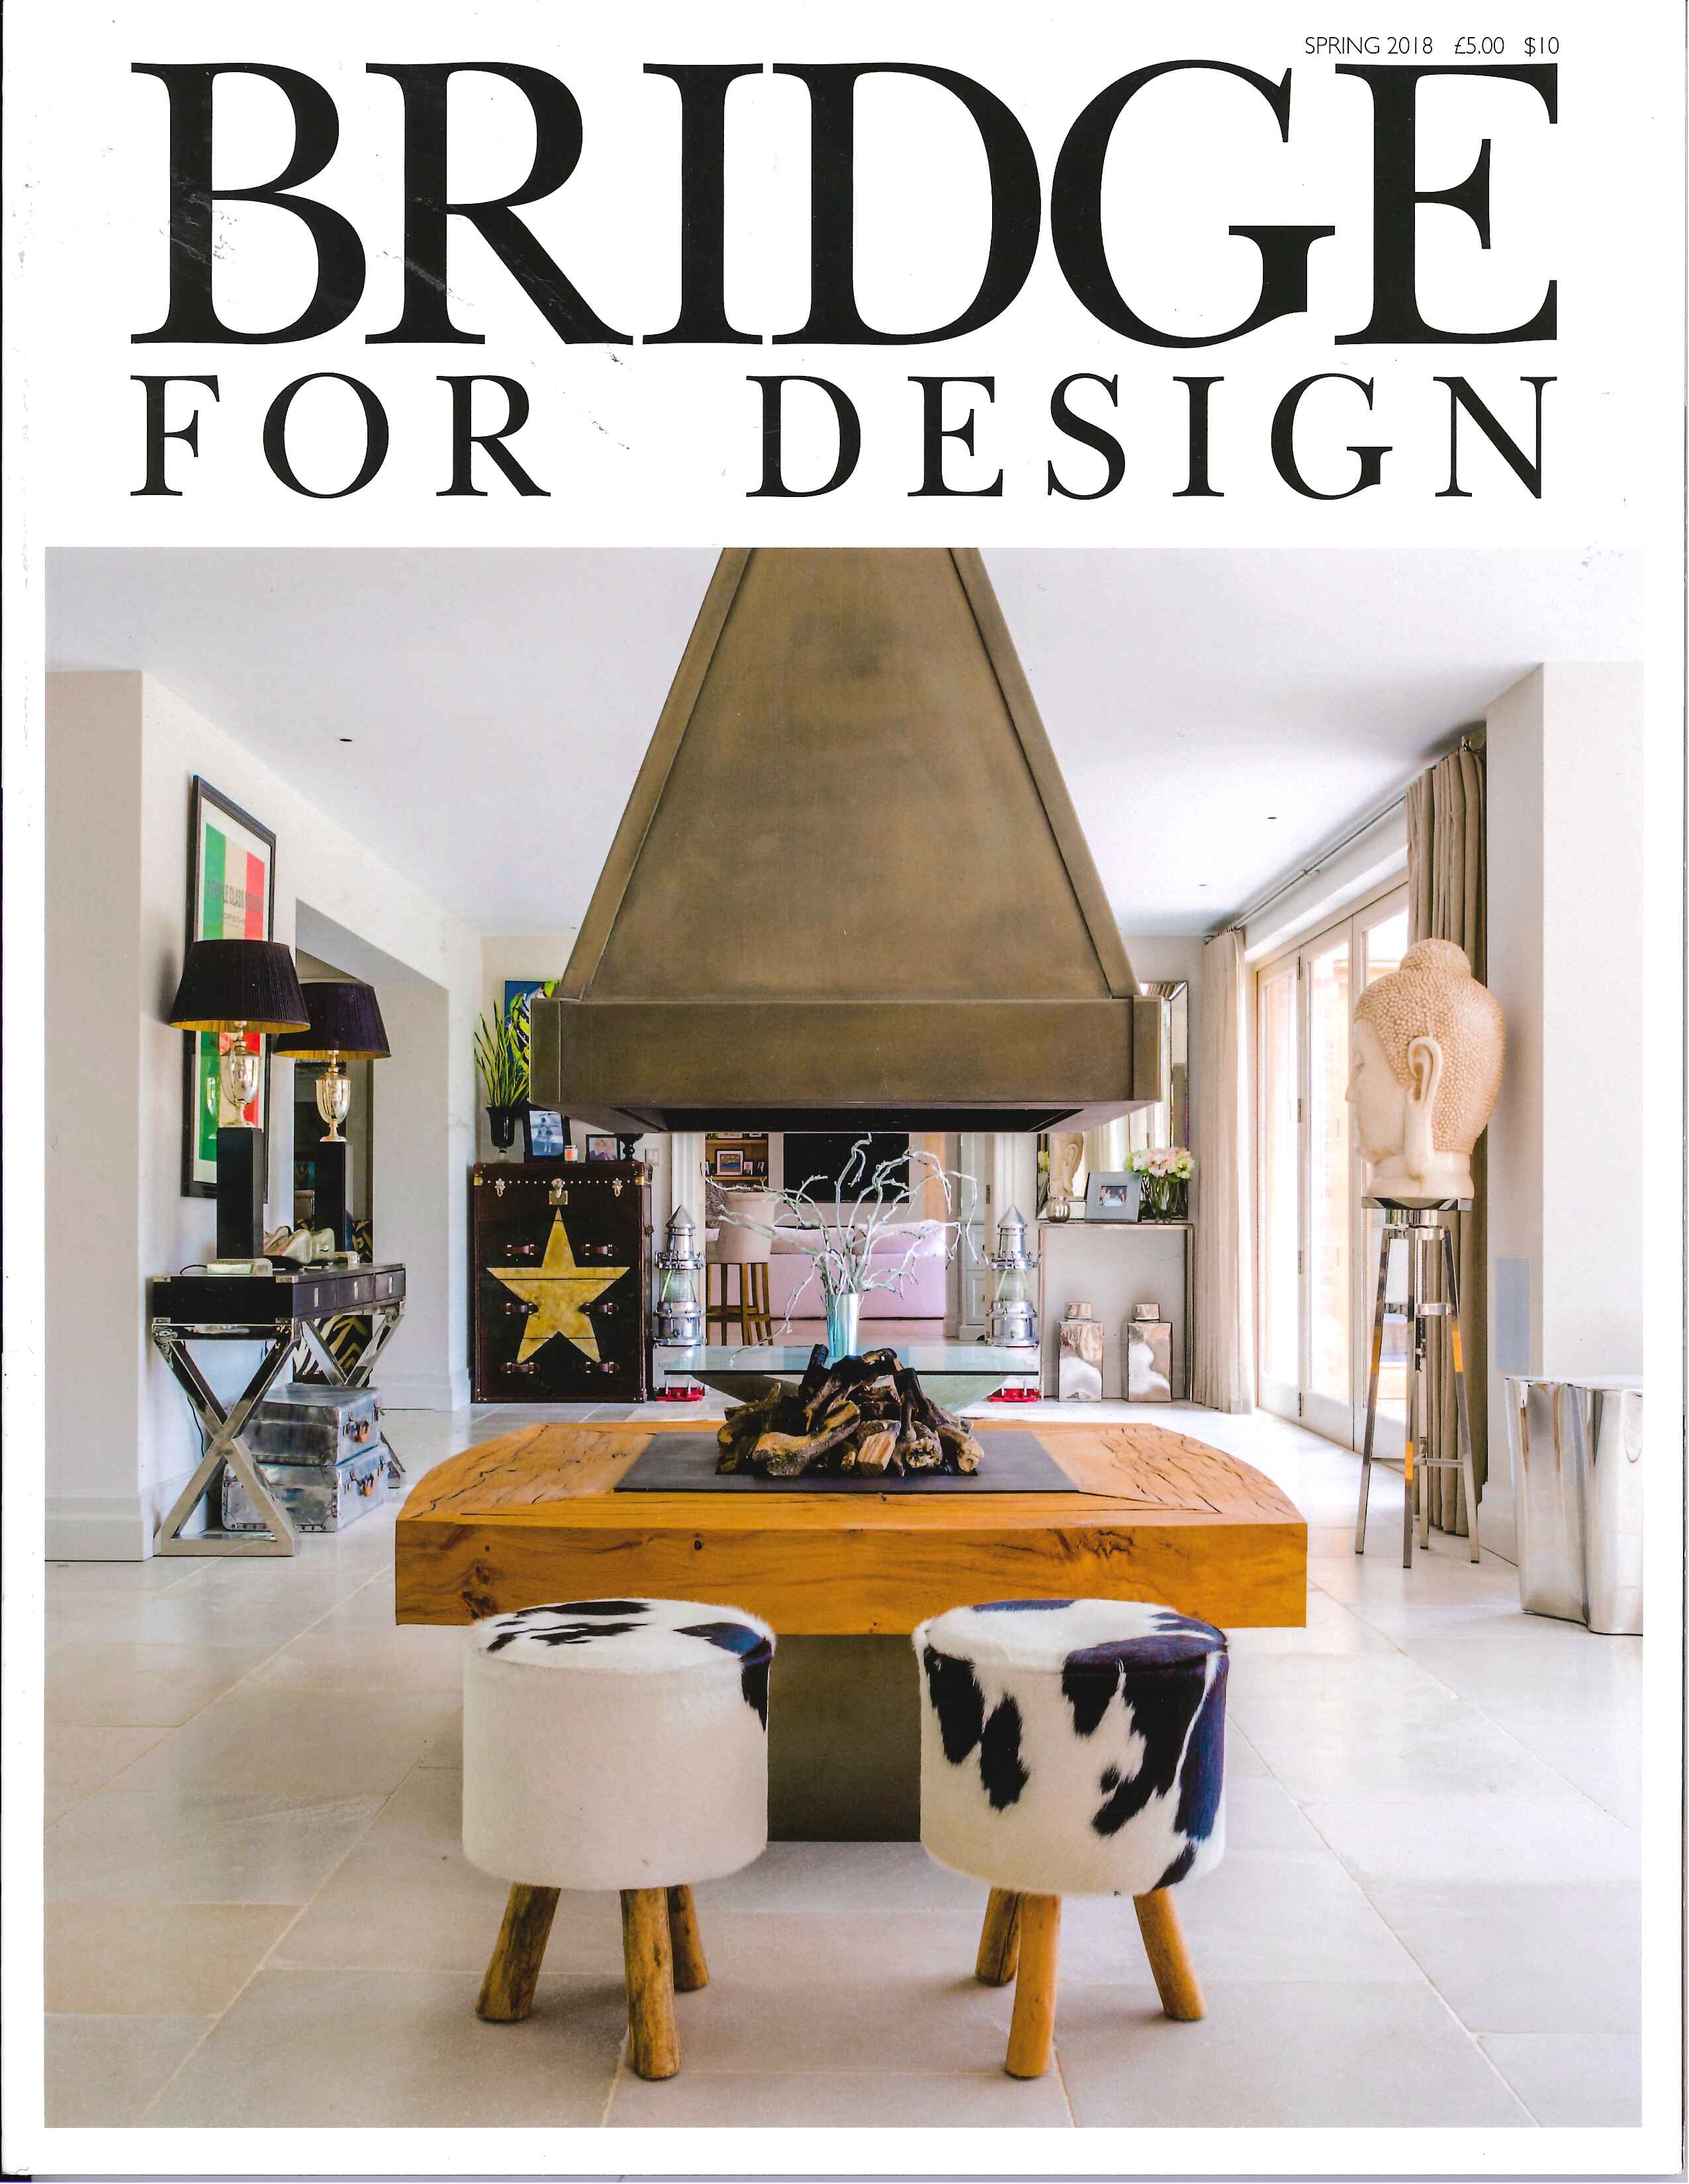 Bridge for Design Spring 2018 issue featuring the j banks collection for stanford furniture